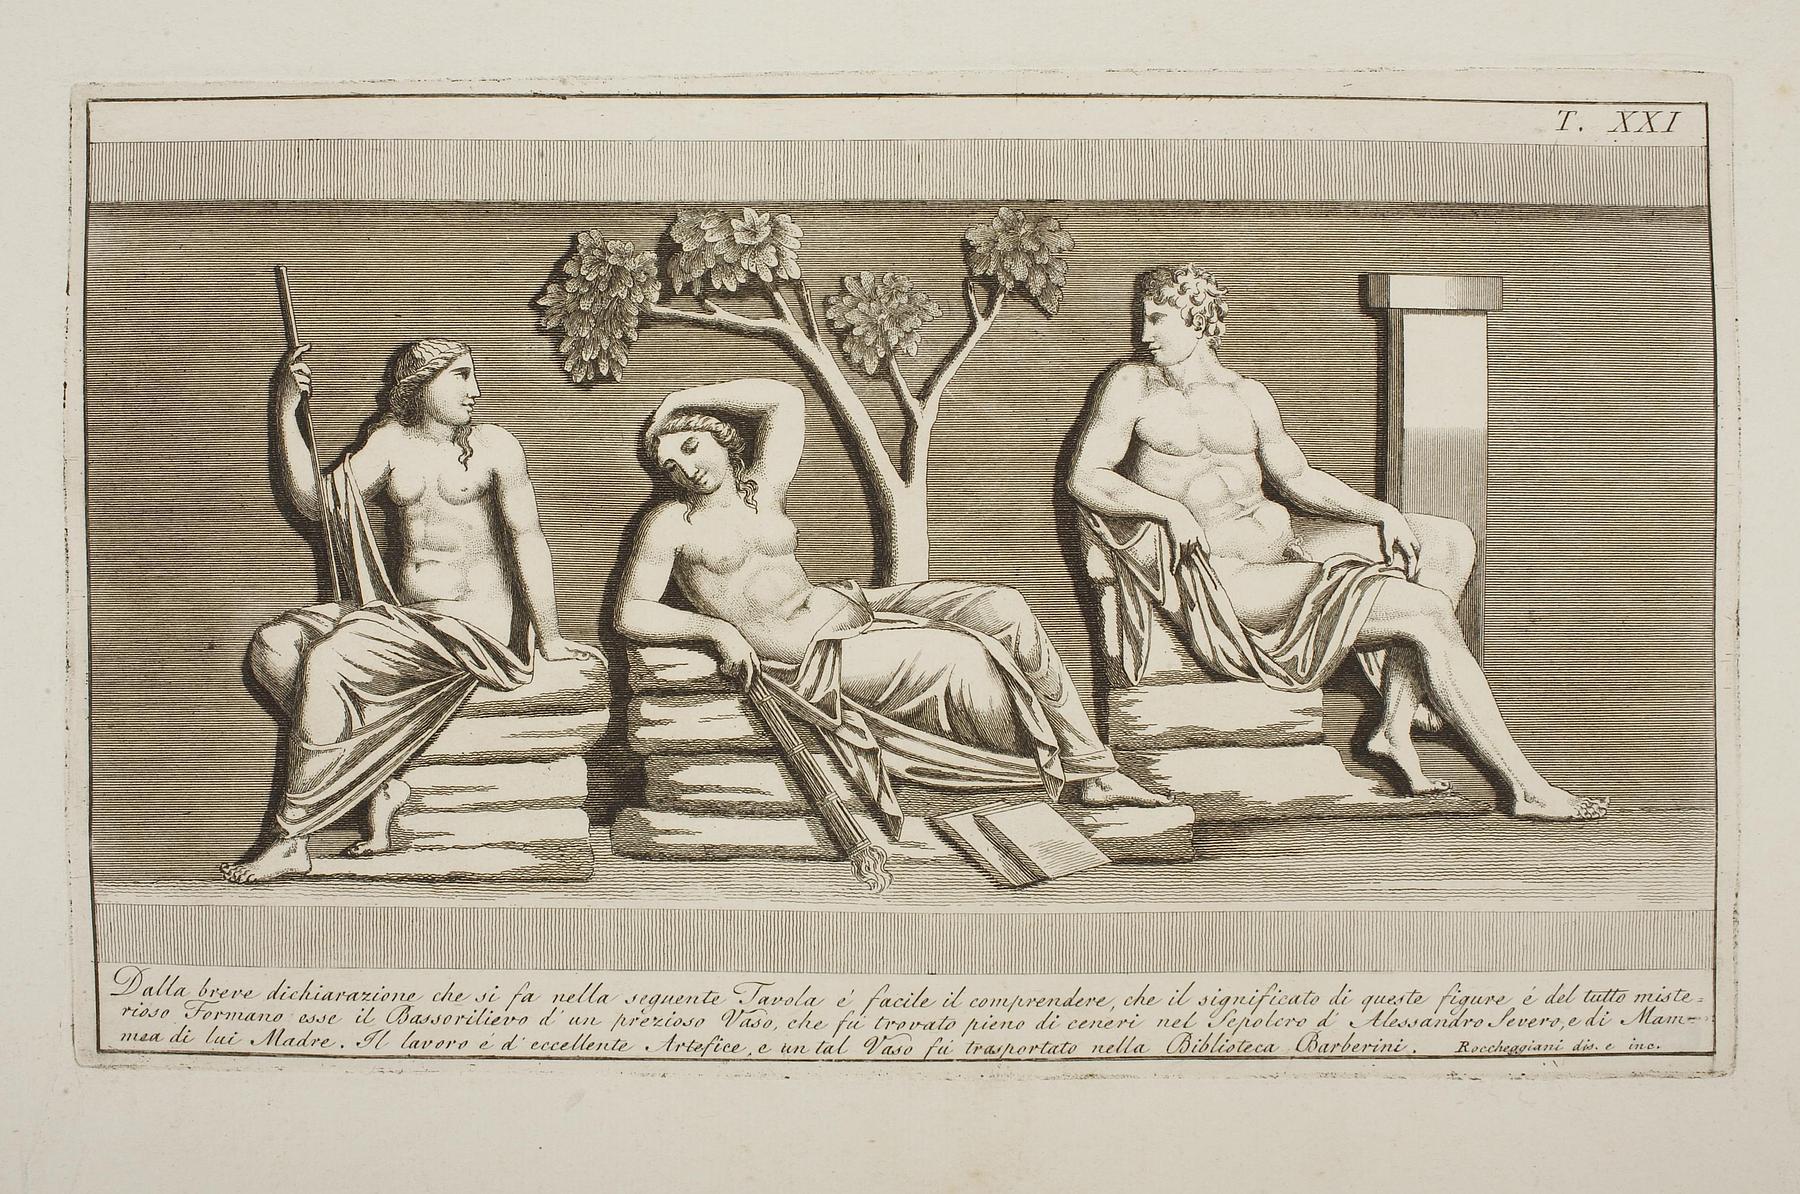 Two Women and one Man Resting on Rocks under a Tree, E1506